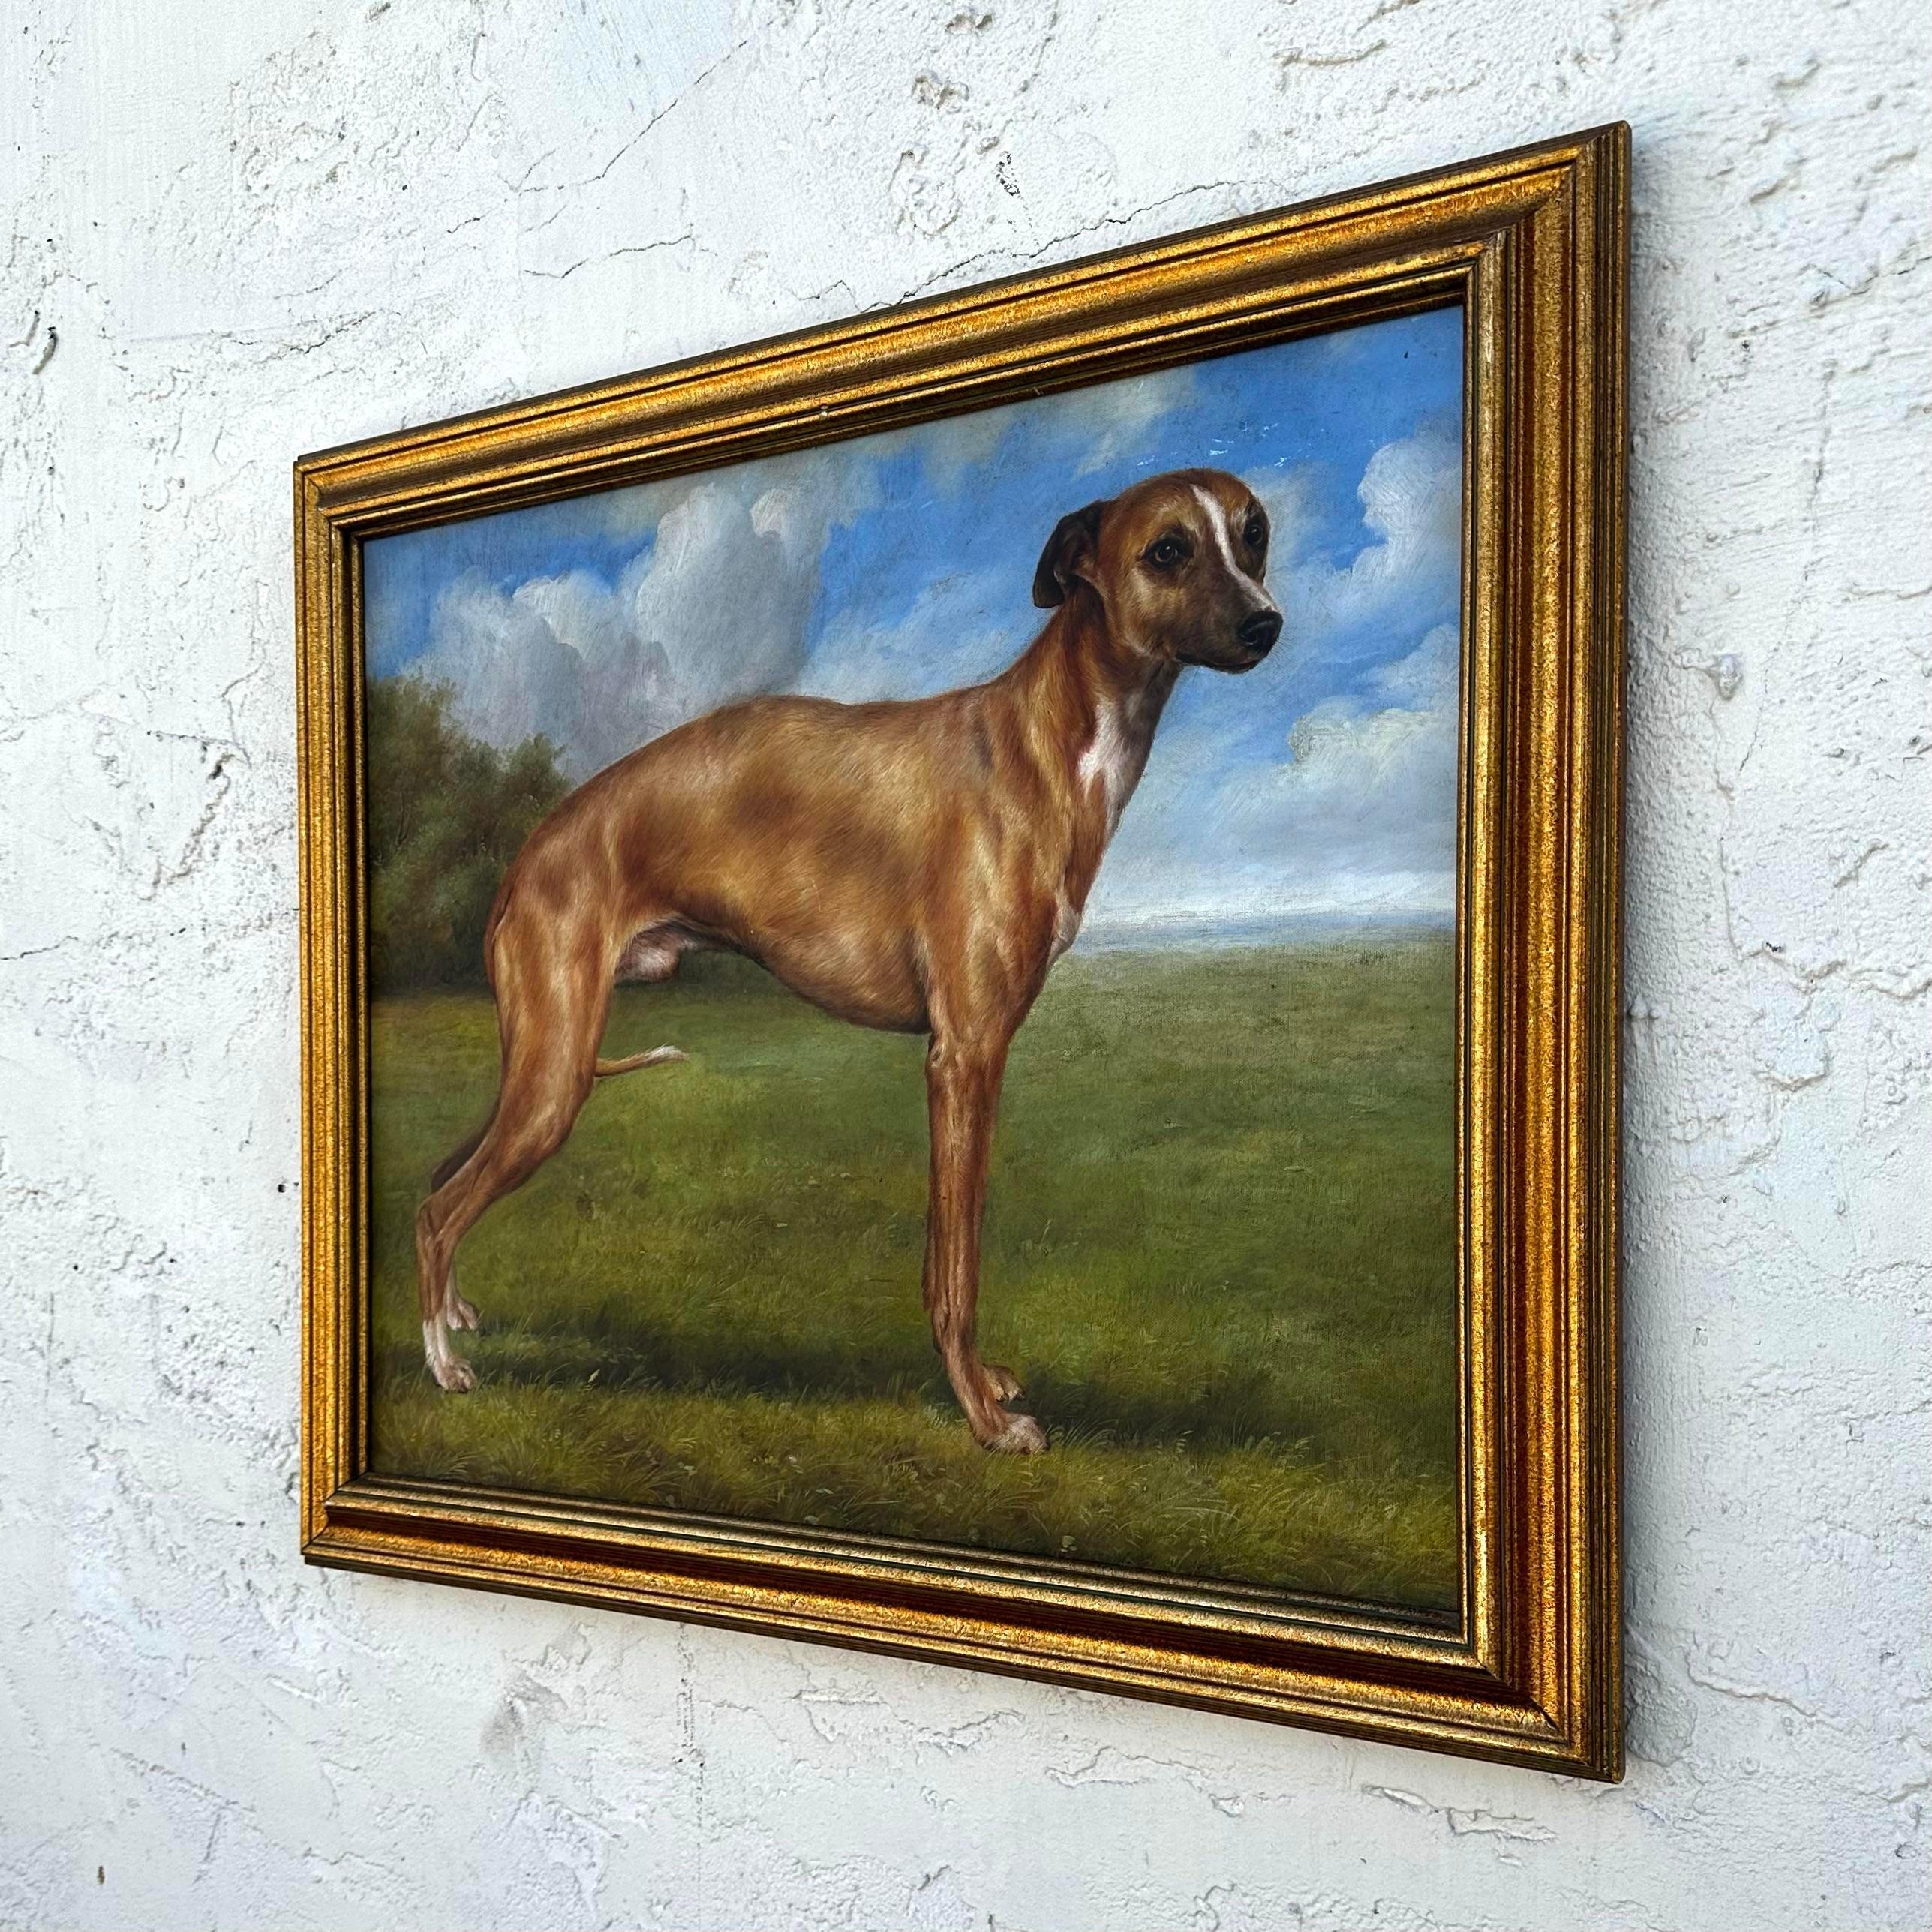 American Classical Mid 20th Century Vintage Boho Portrait on Dog on Canvas, Framed For Sale